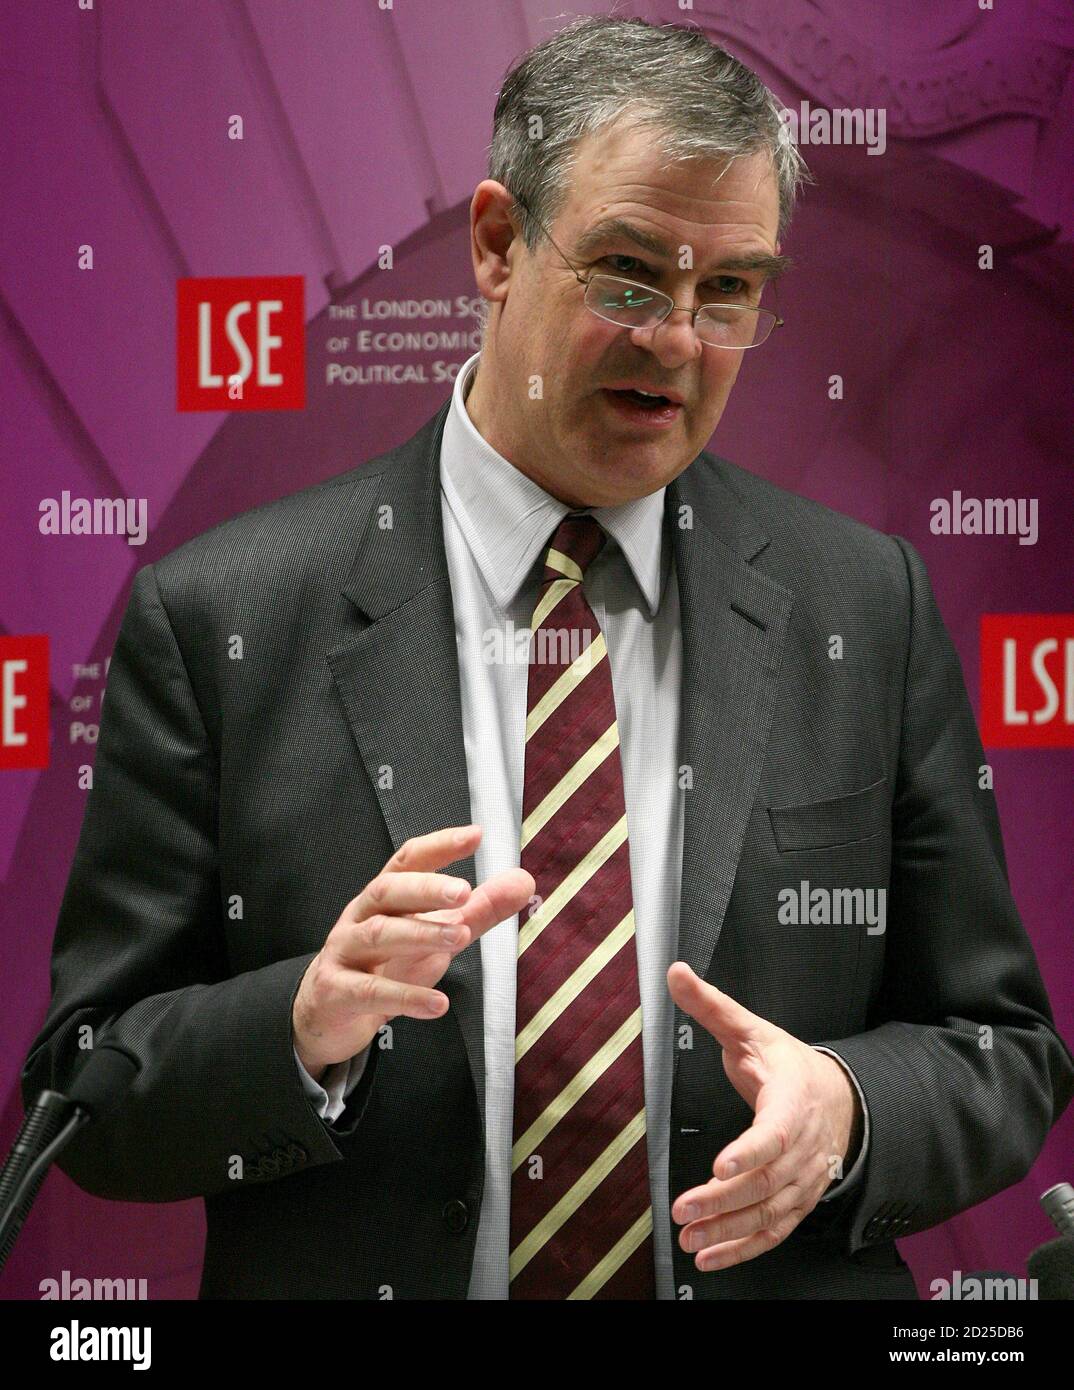 Deputy Governor of the Bank of England John Gieve delivers his speech at the London School of Economics in London February 19, 2009. Policy makers need to back their judgements with pre-emptive action, Gieve said on Thursday in a speech reflecting on the lessons of the financial crisis.     REUTERS/Andrew Parsons    (BRITAIN) Stock Photo